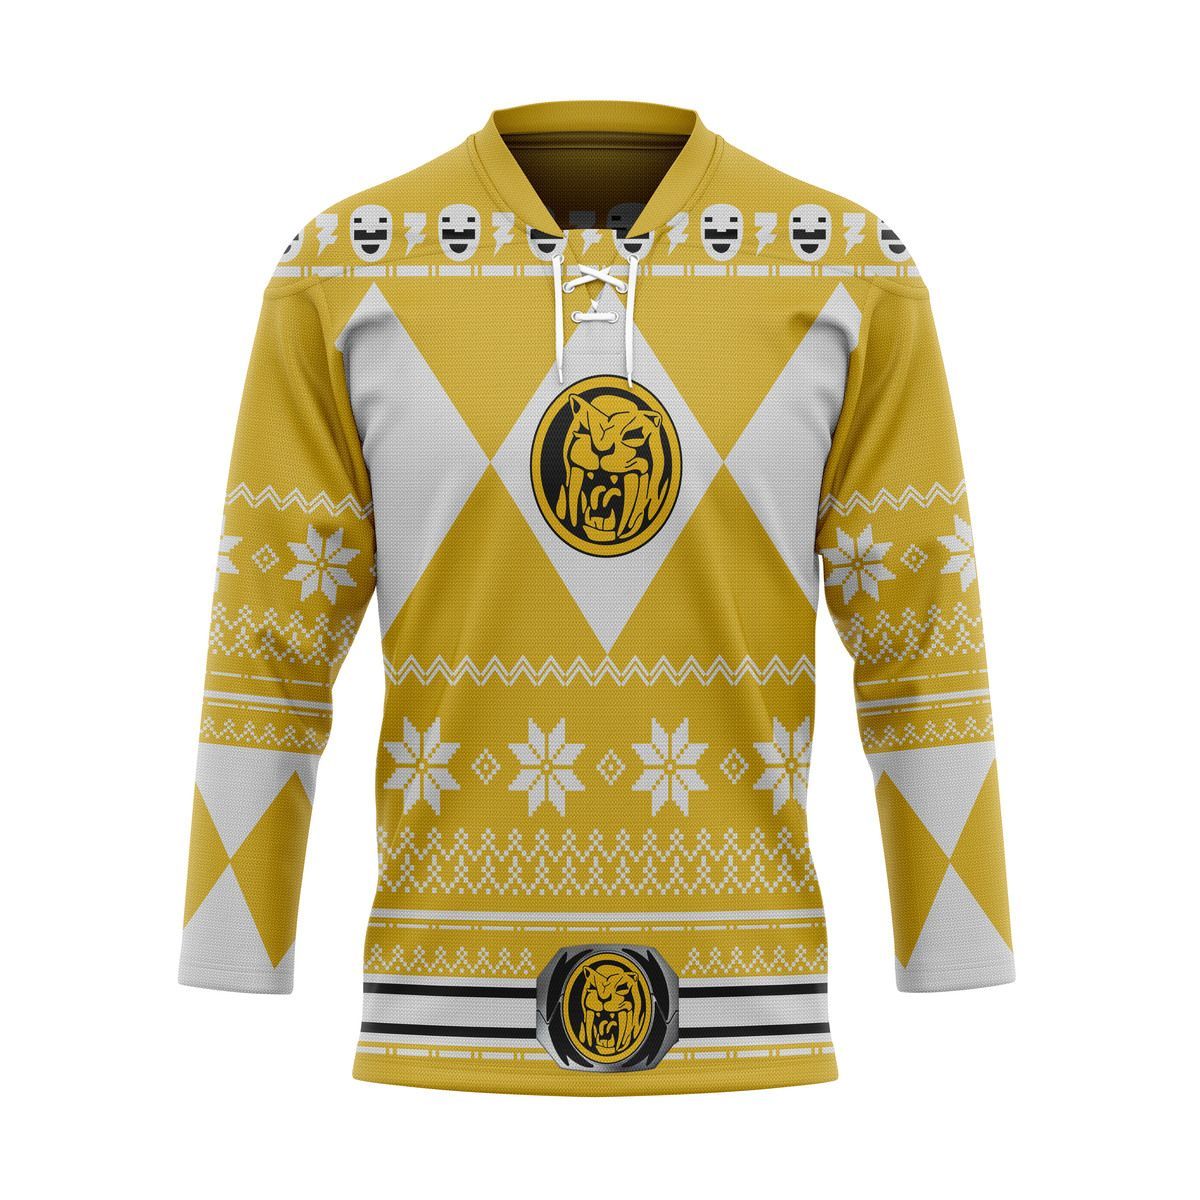 Top cool Hockey jersey for fan You can buy online. 105